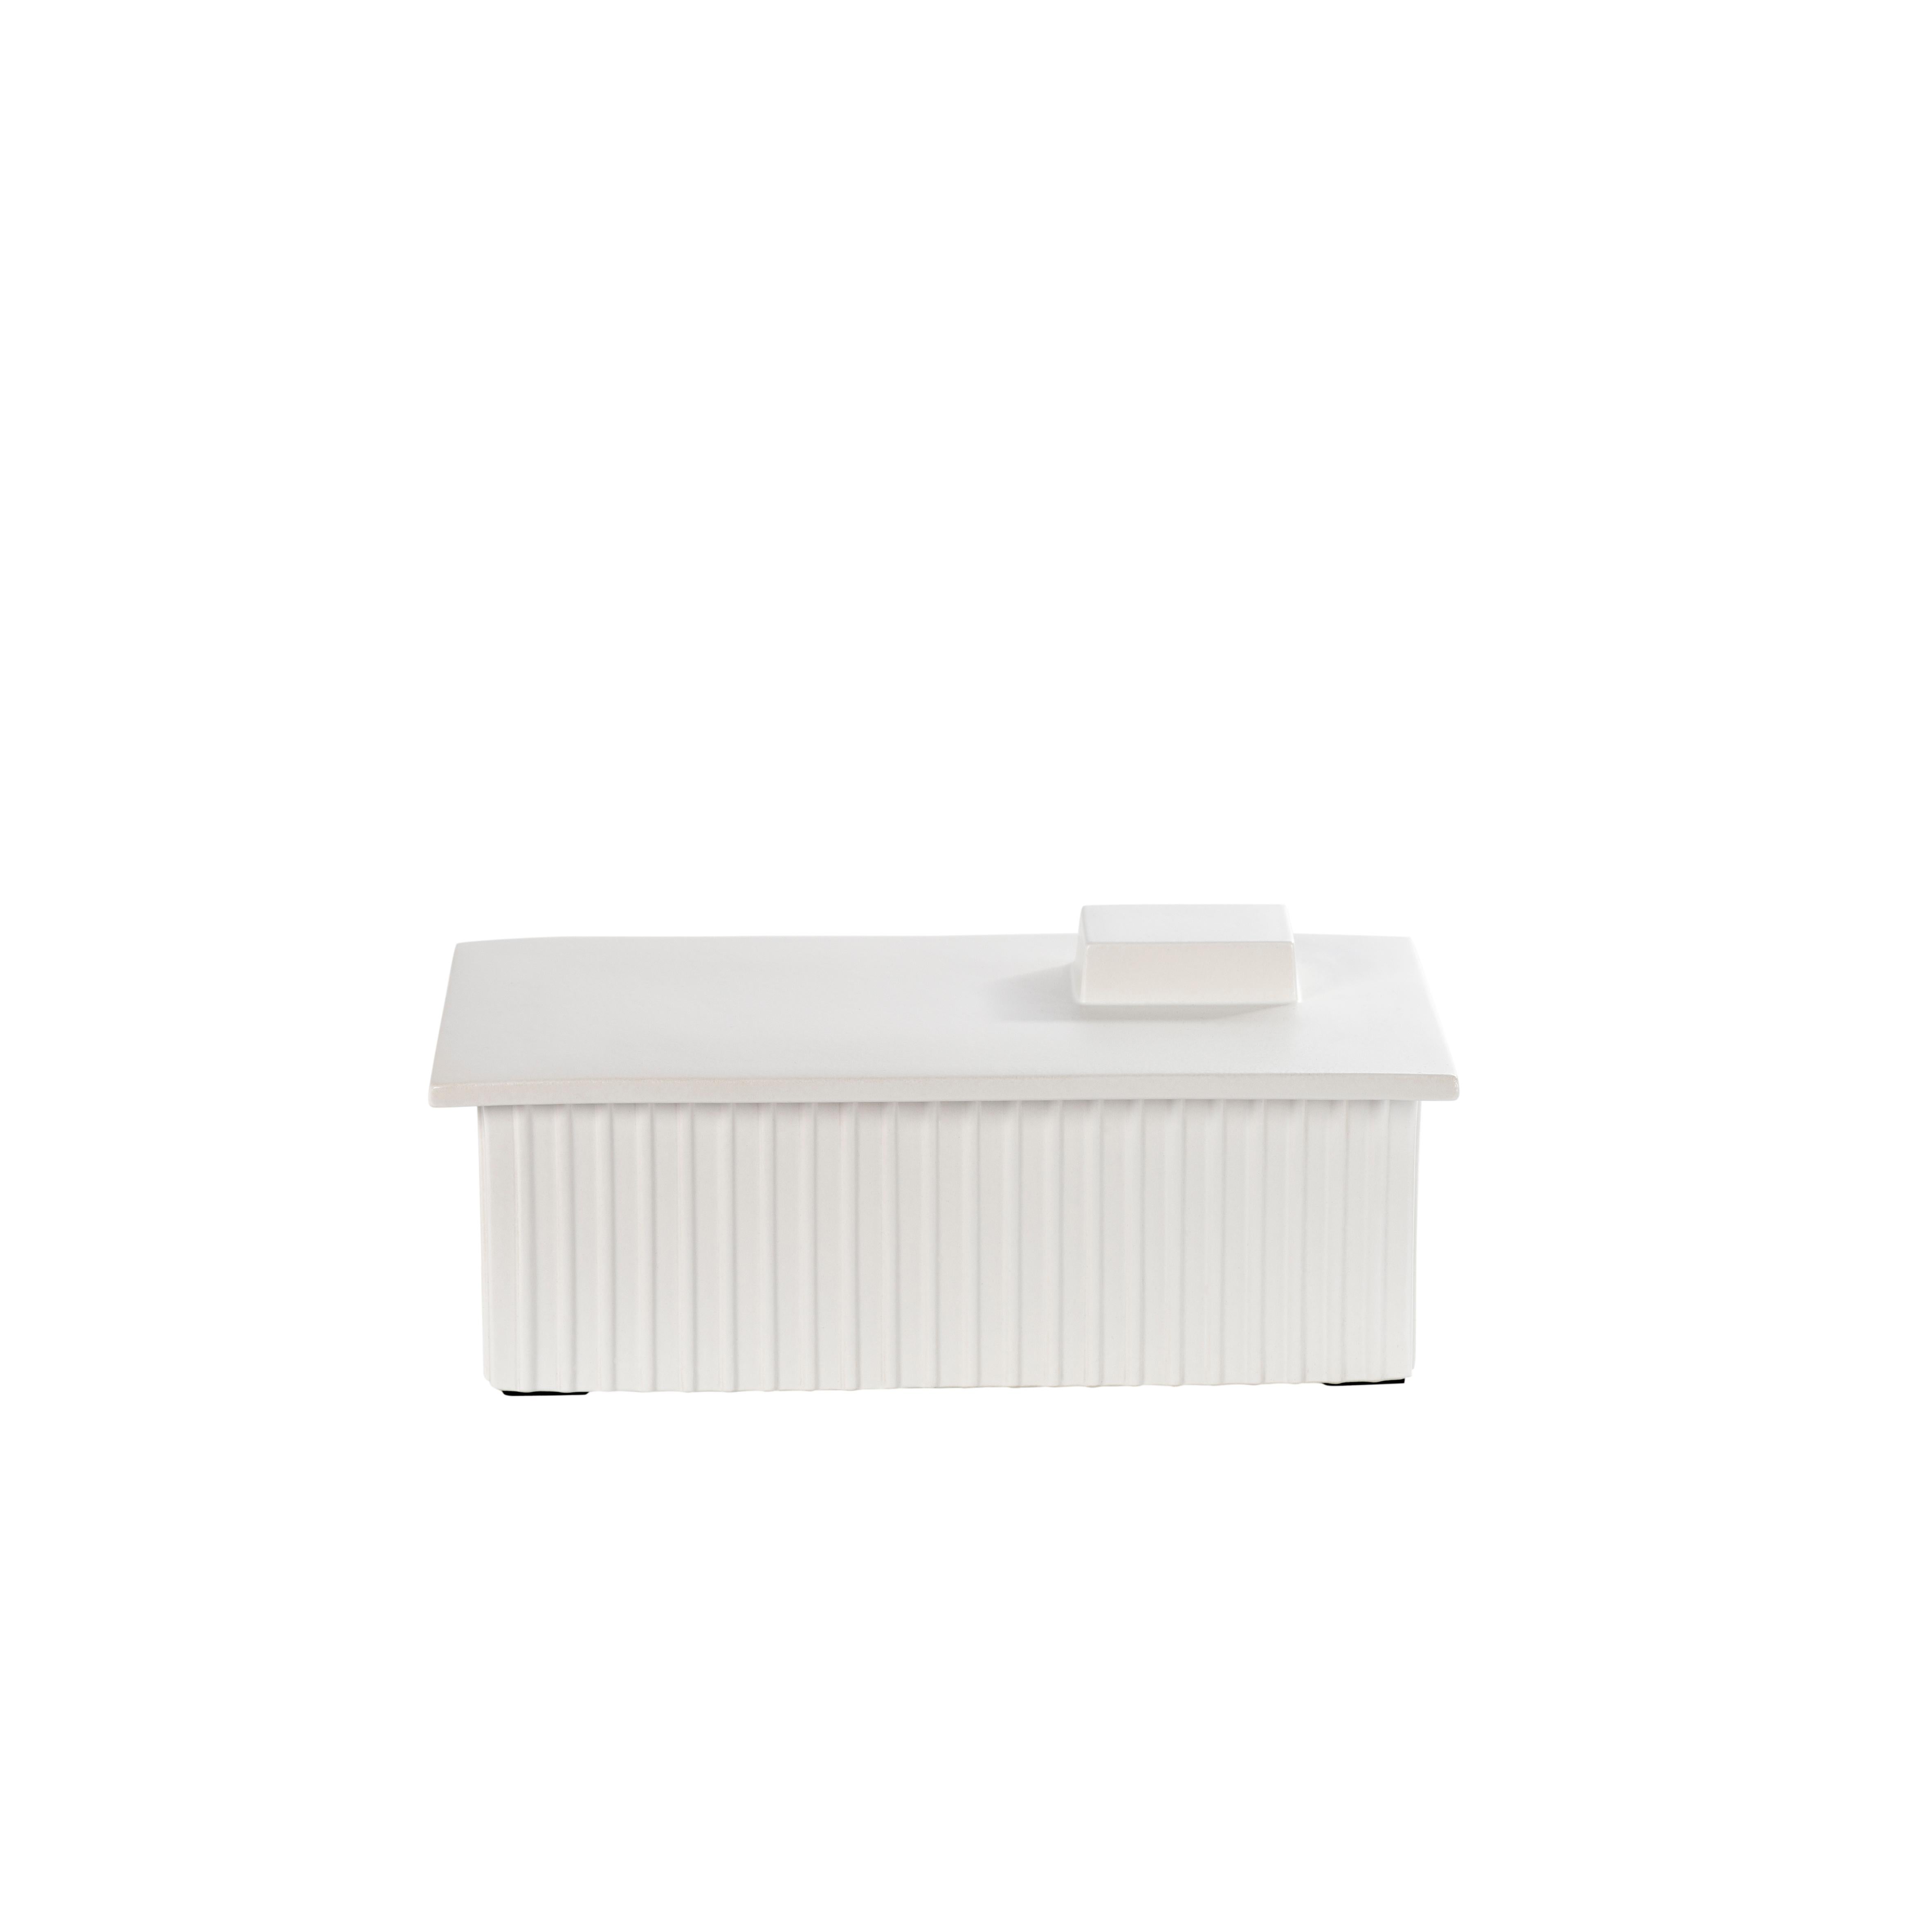 Building big white box by Pulpo
Dimensions: D 32.5 x W 17 x H 13 cm
Materials: ceramic

Also available in different colours. 

This building boxes bring to mind the industrial areas so familiar within our urban landscapes. An industrial